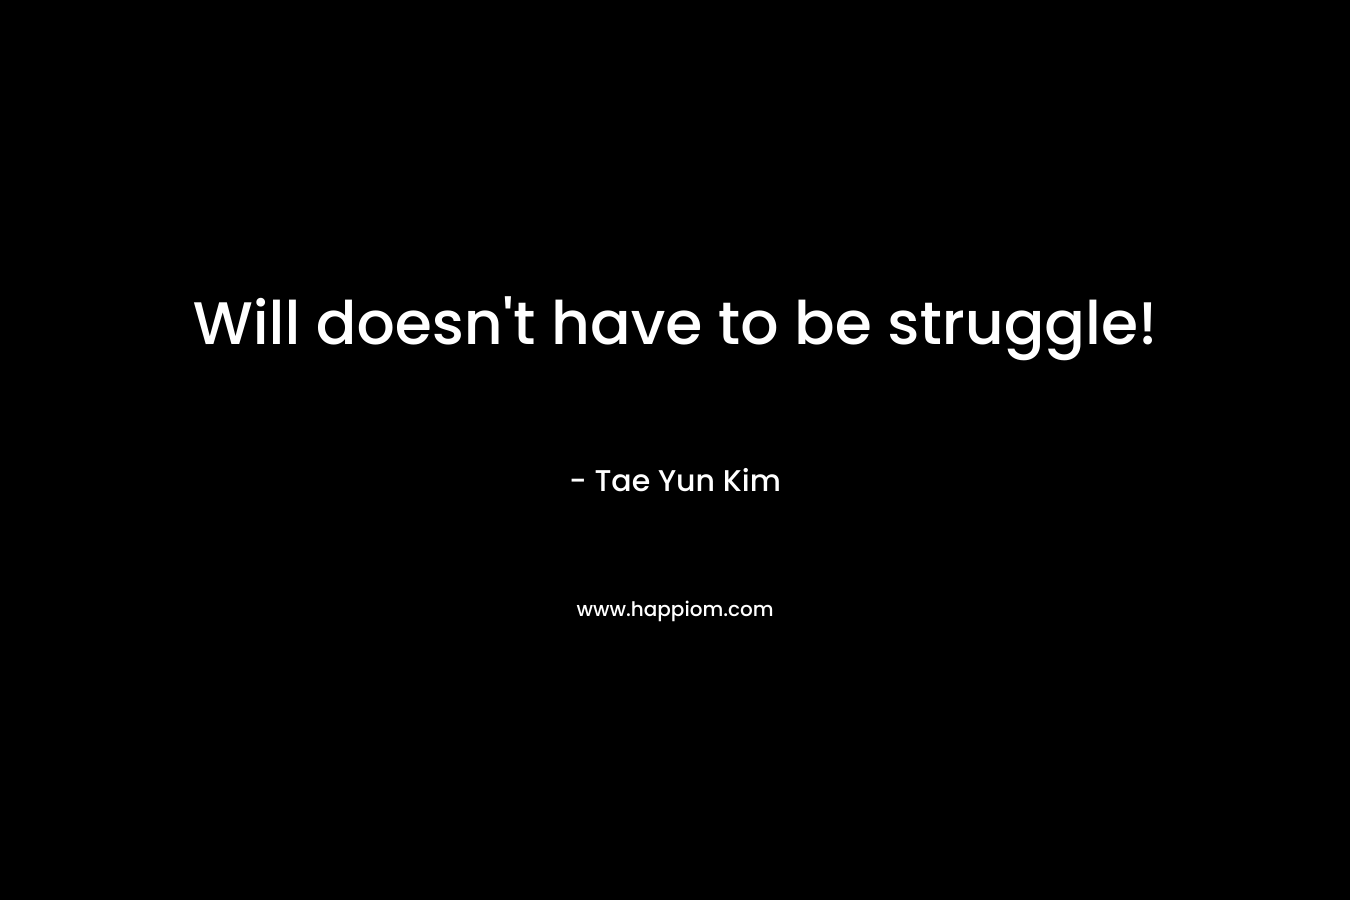 Will doesn't have to be struggle!